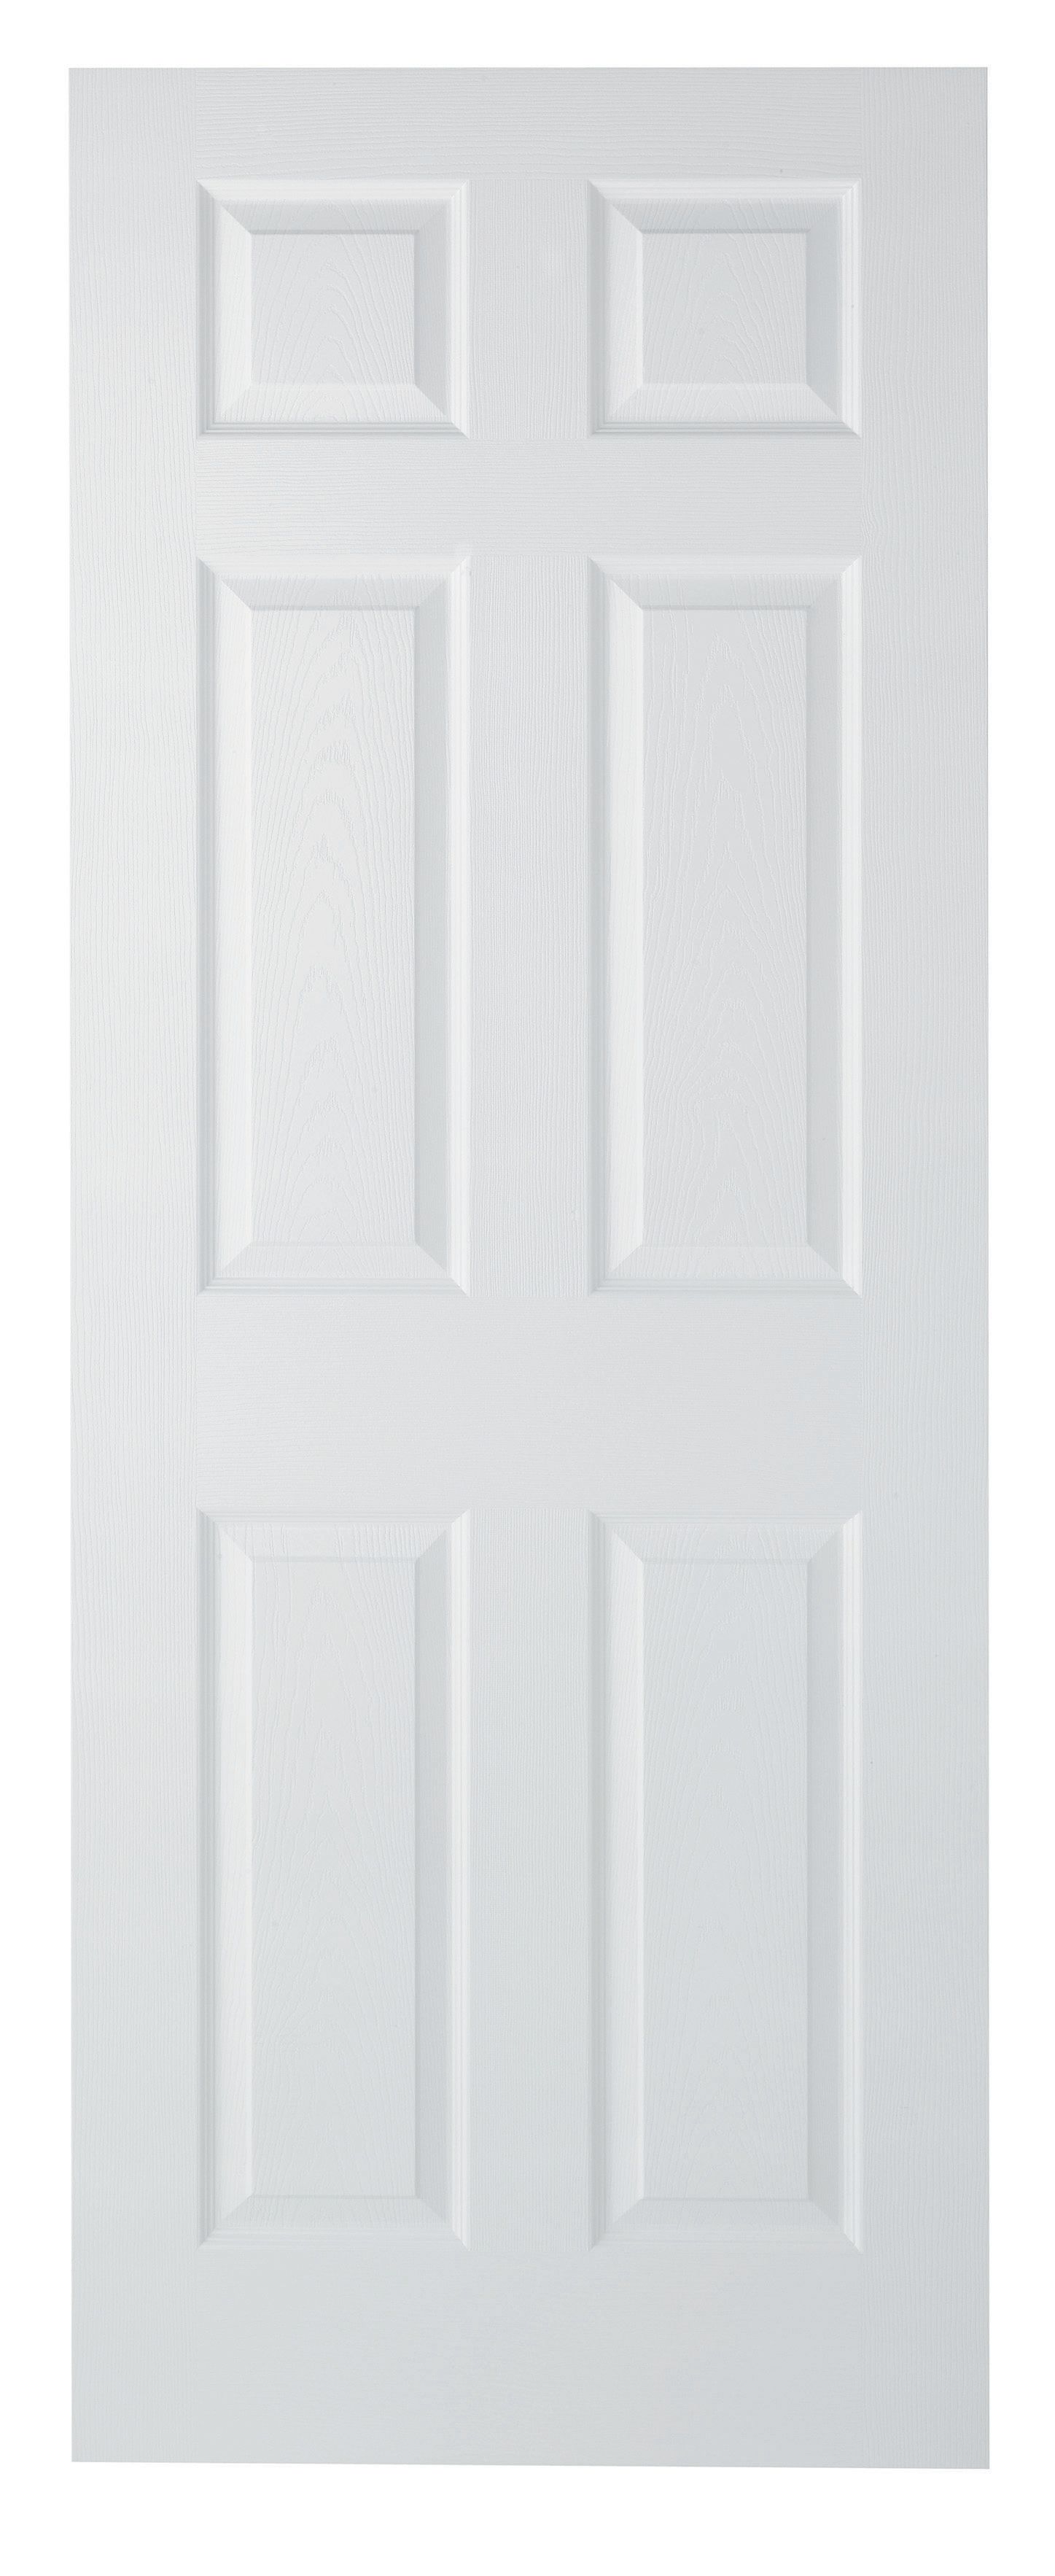 Wickes Lincoln White Grained Moulded Fully Finished 6 Panel Internal Door